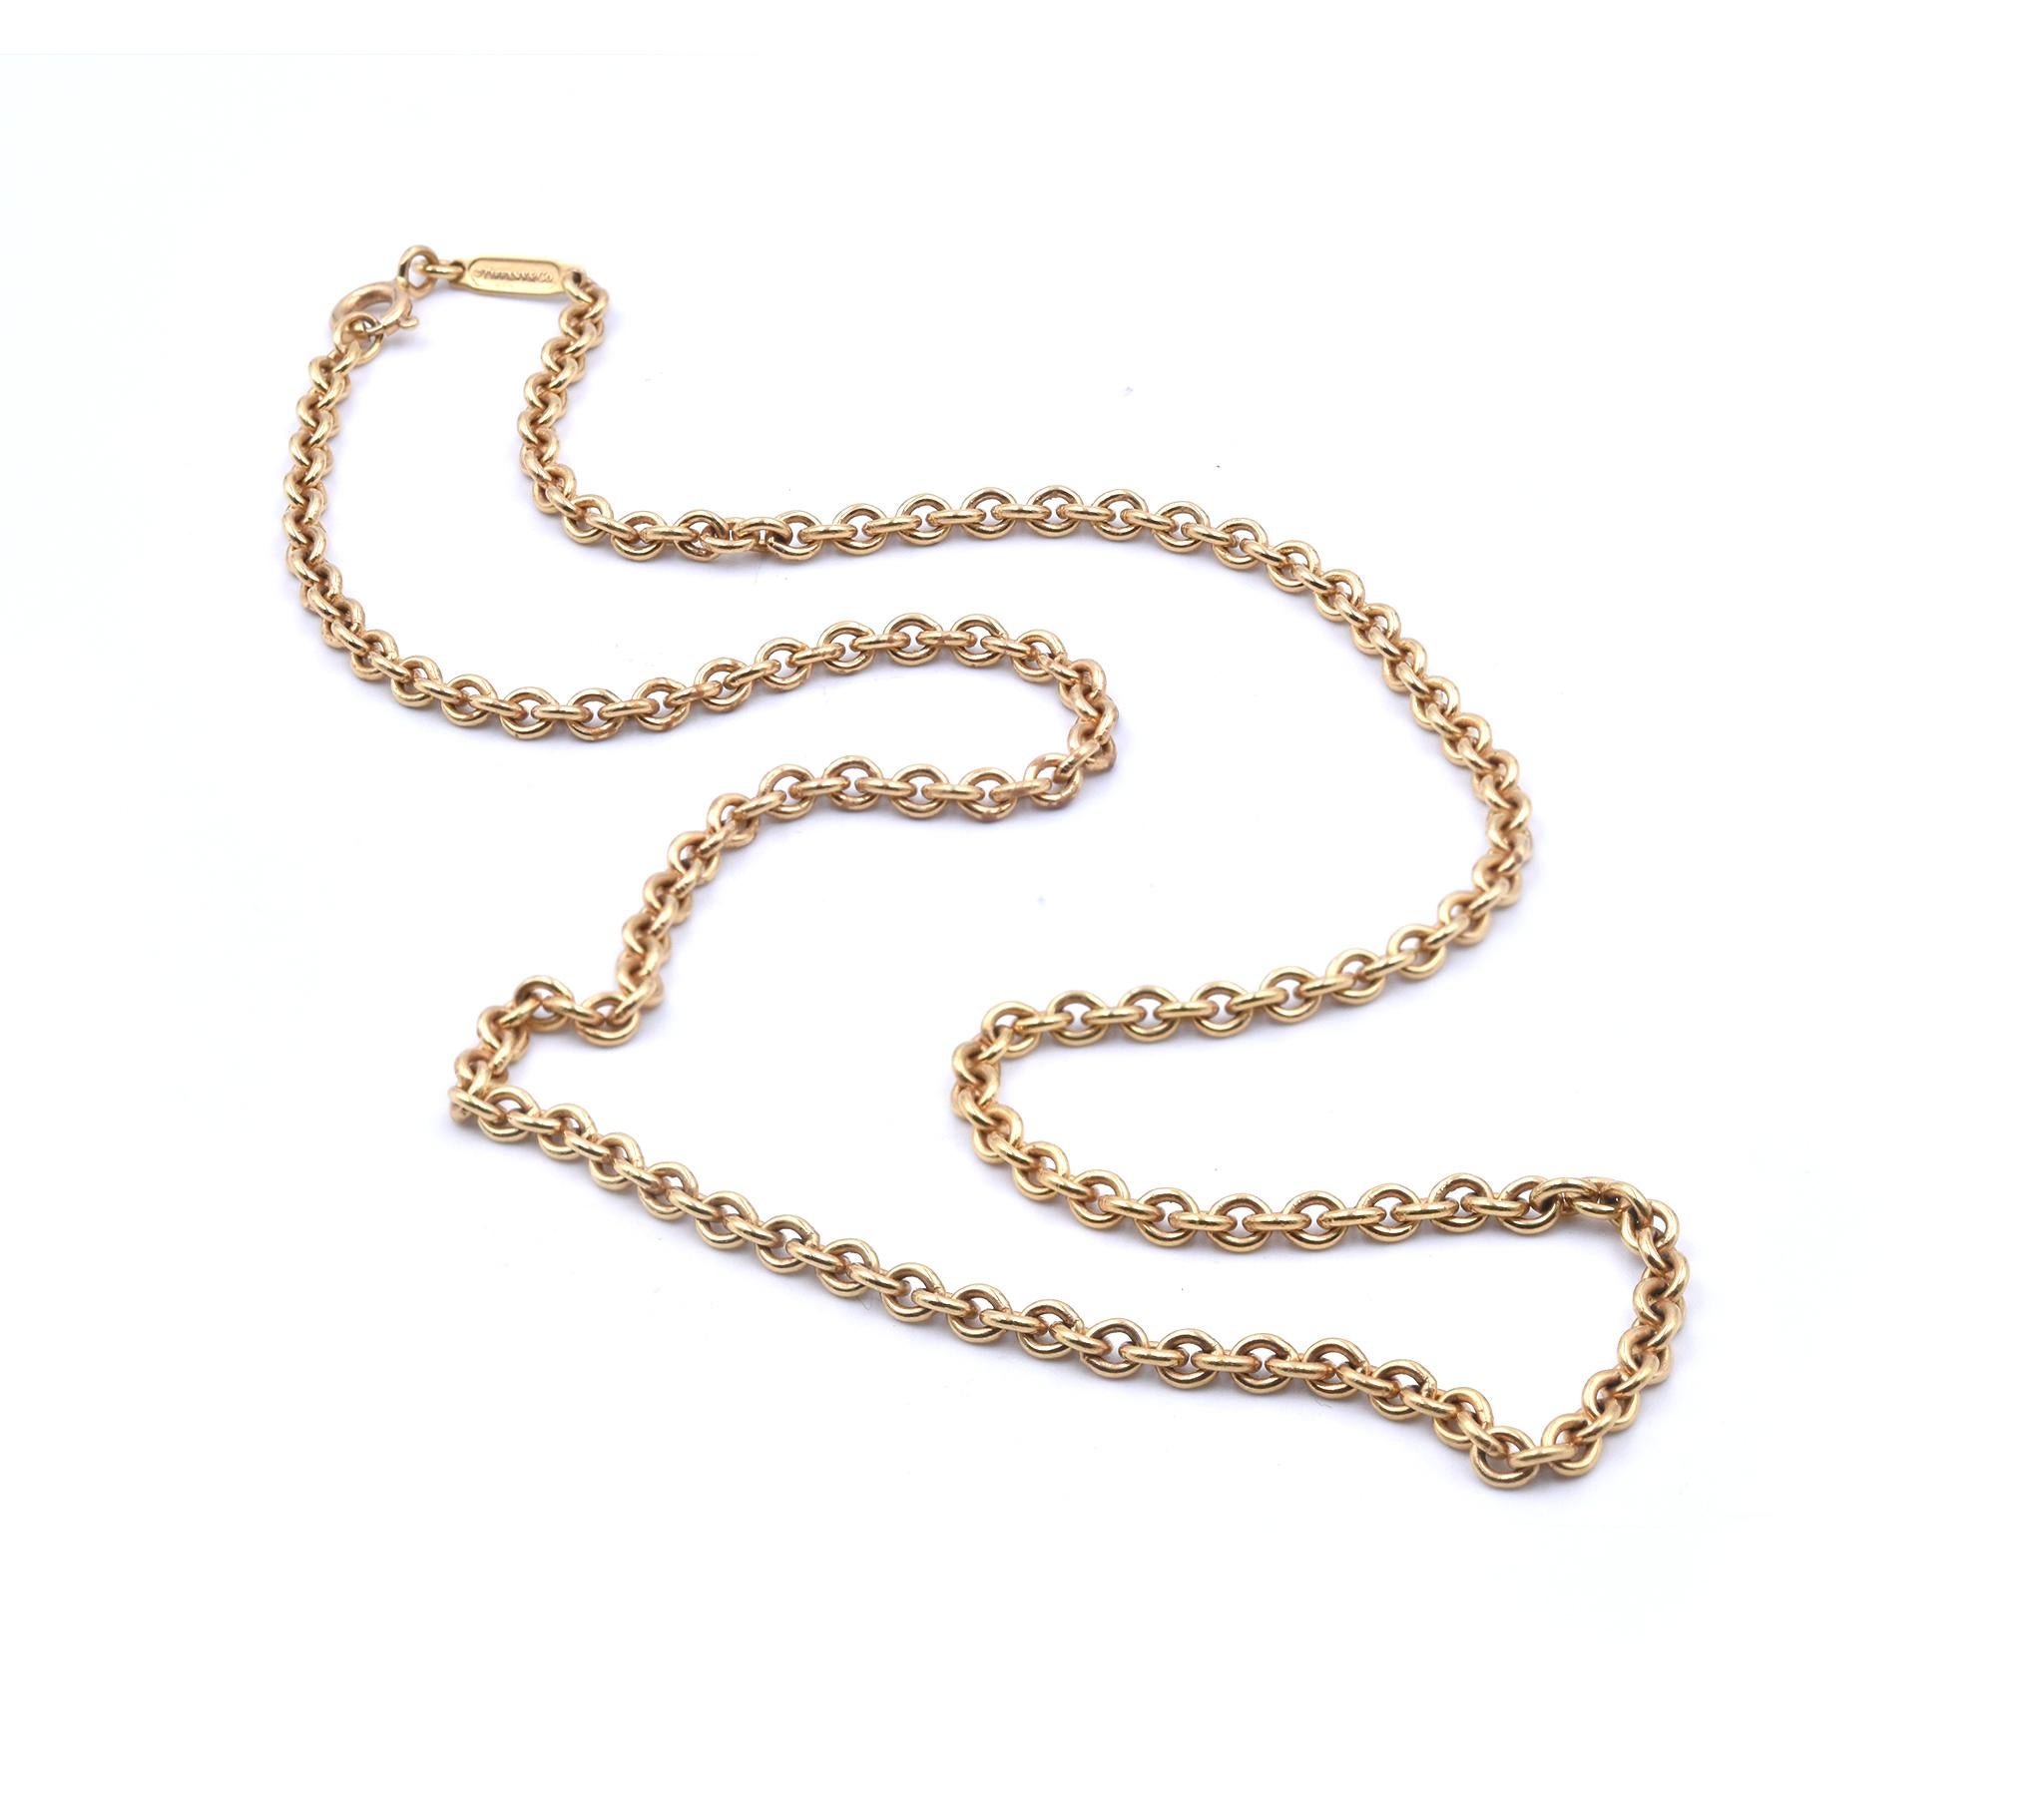 Designer: Tiffany & Co.
Material: 18k yellow gold 
Dimensions: necklace measures 16-inches 
Weight: 11.9 grams
